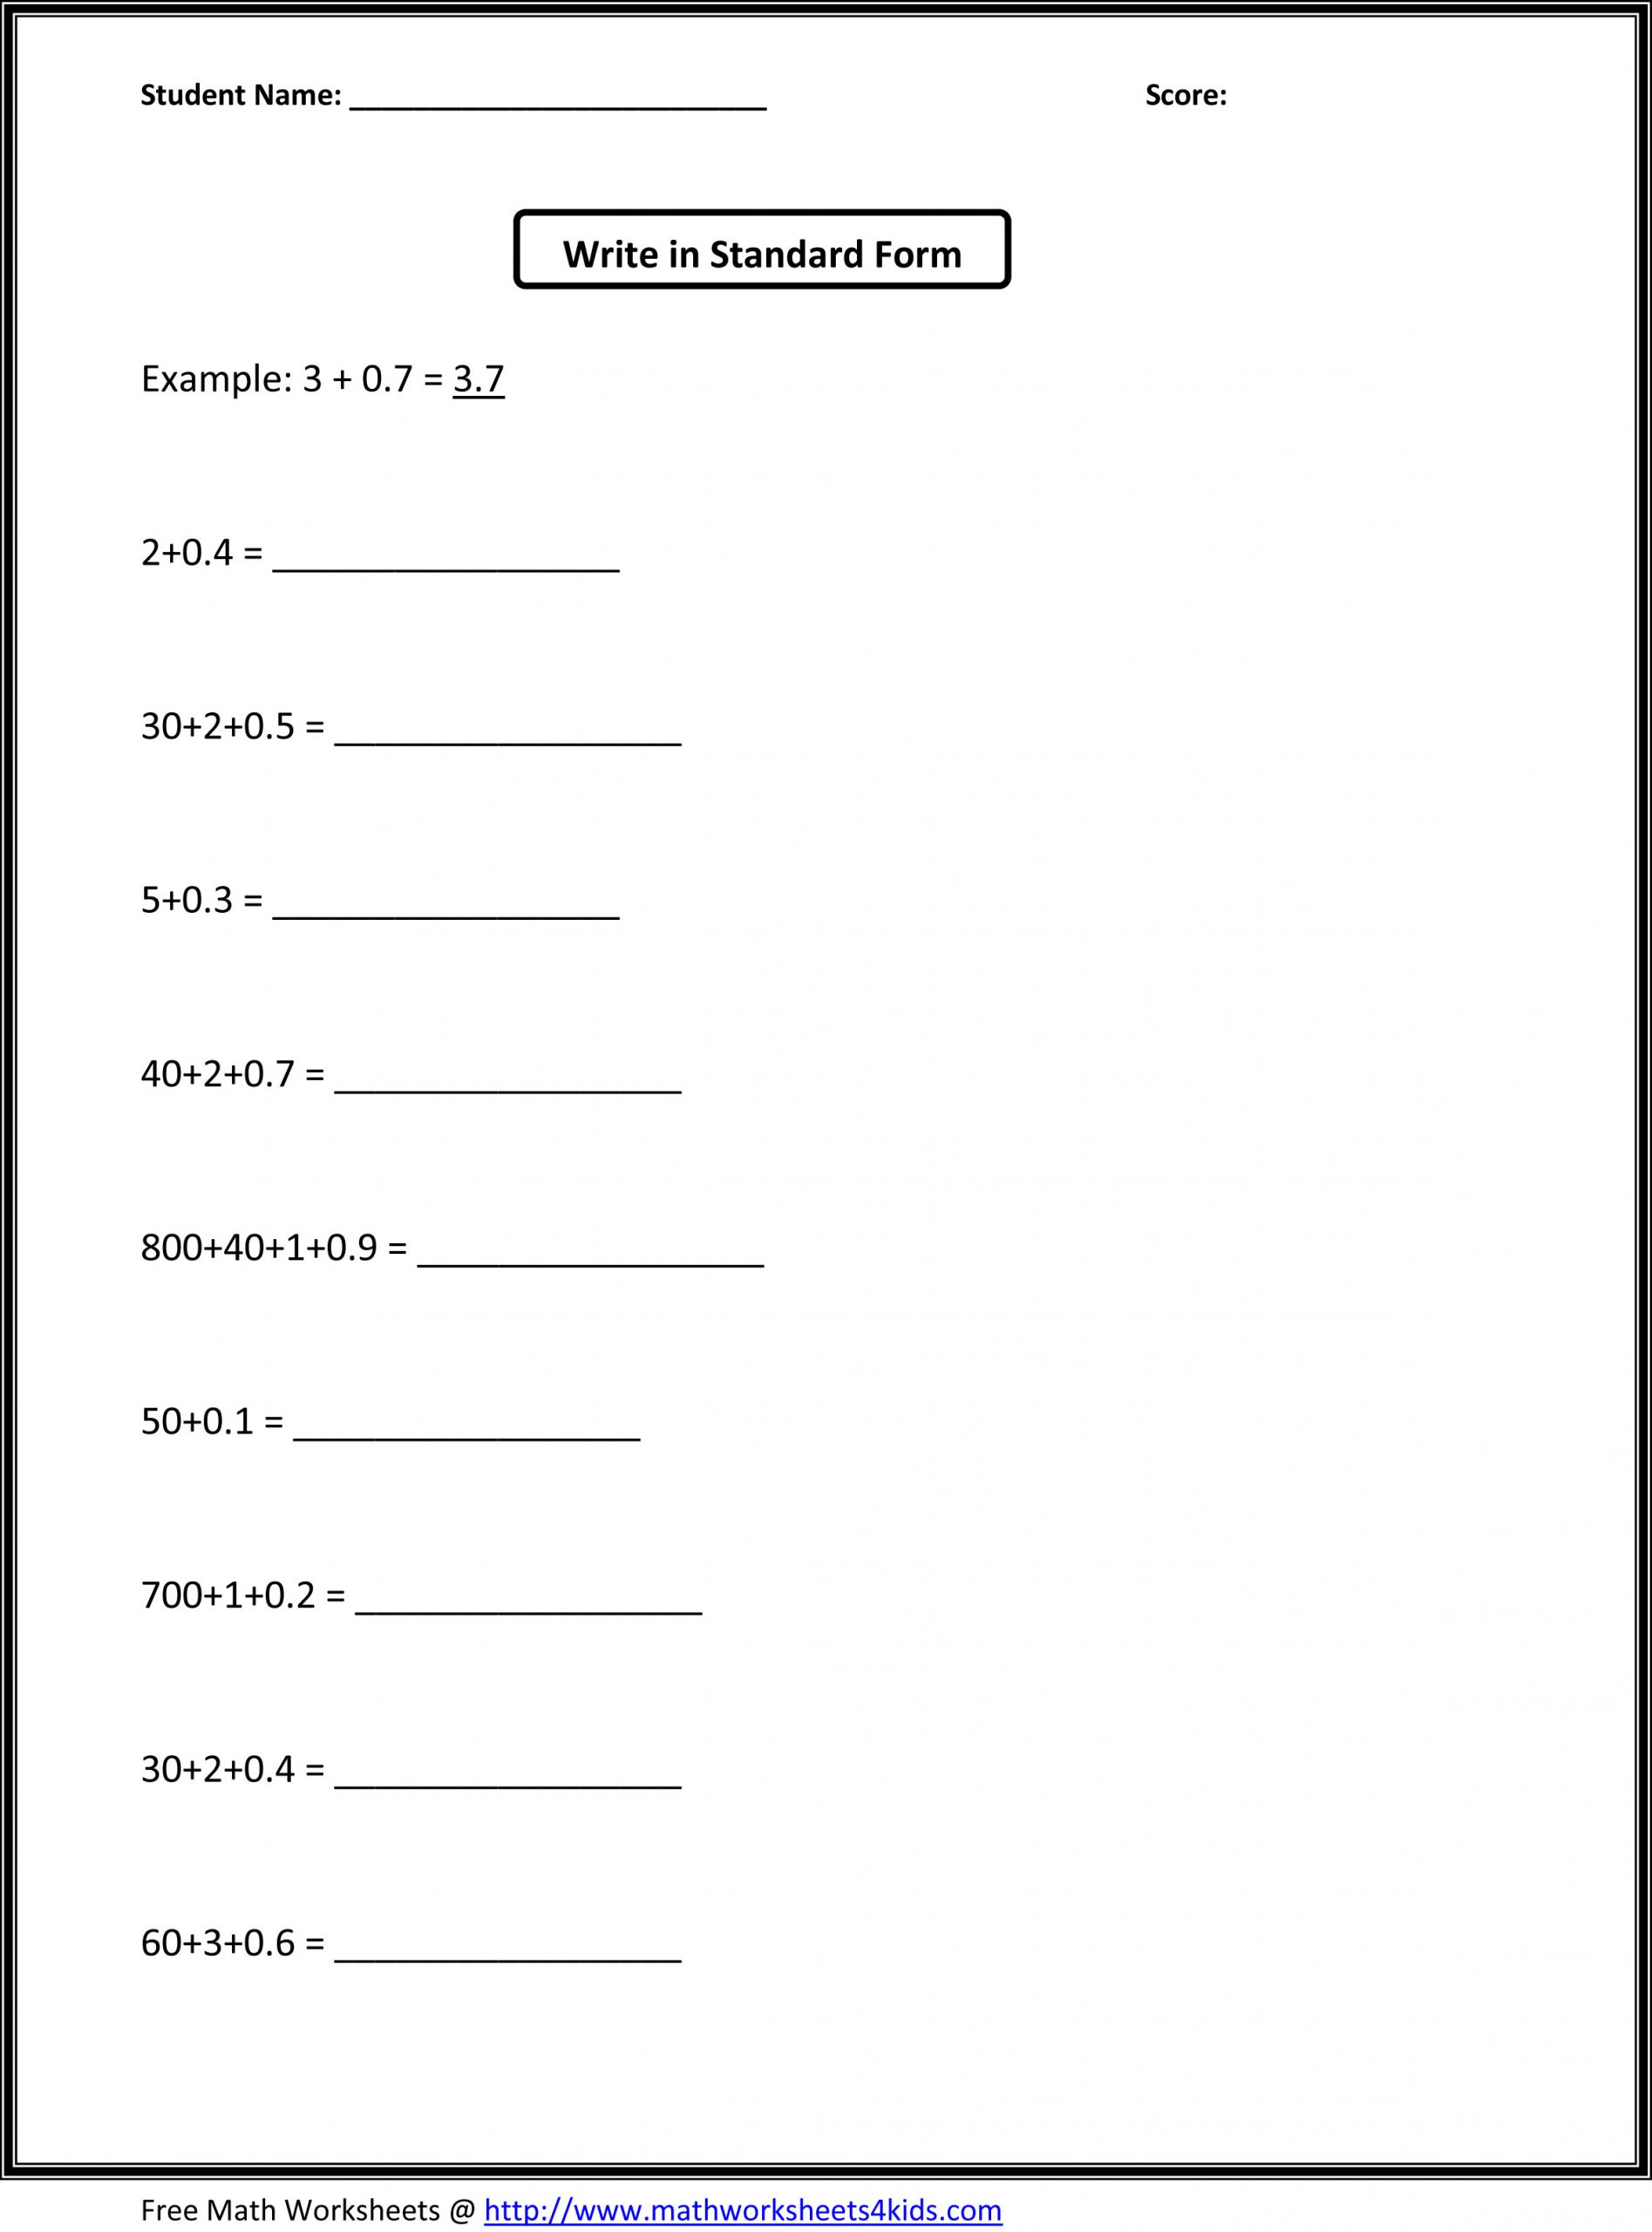 Free Math Worksheets Fourth Grade 4 Addition Adding whole Hundreds 3 Addends